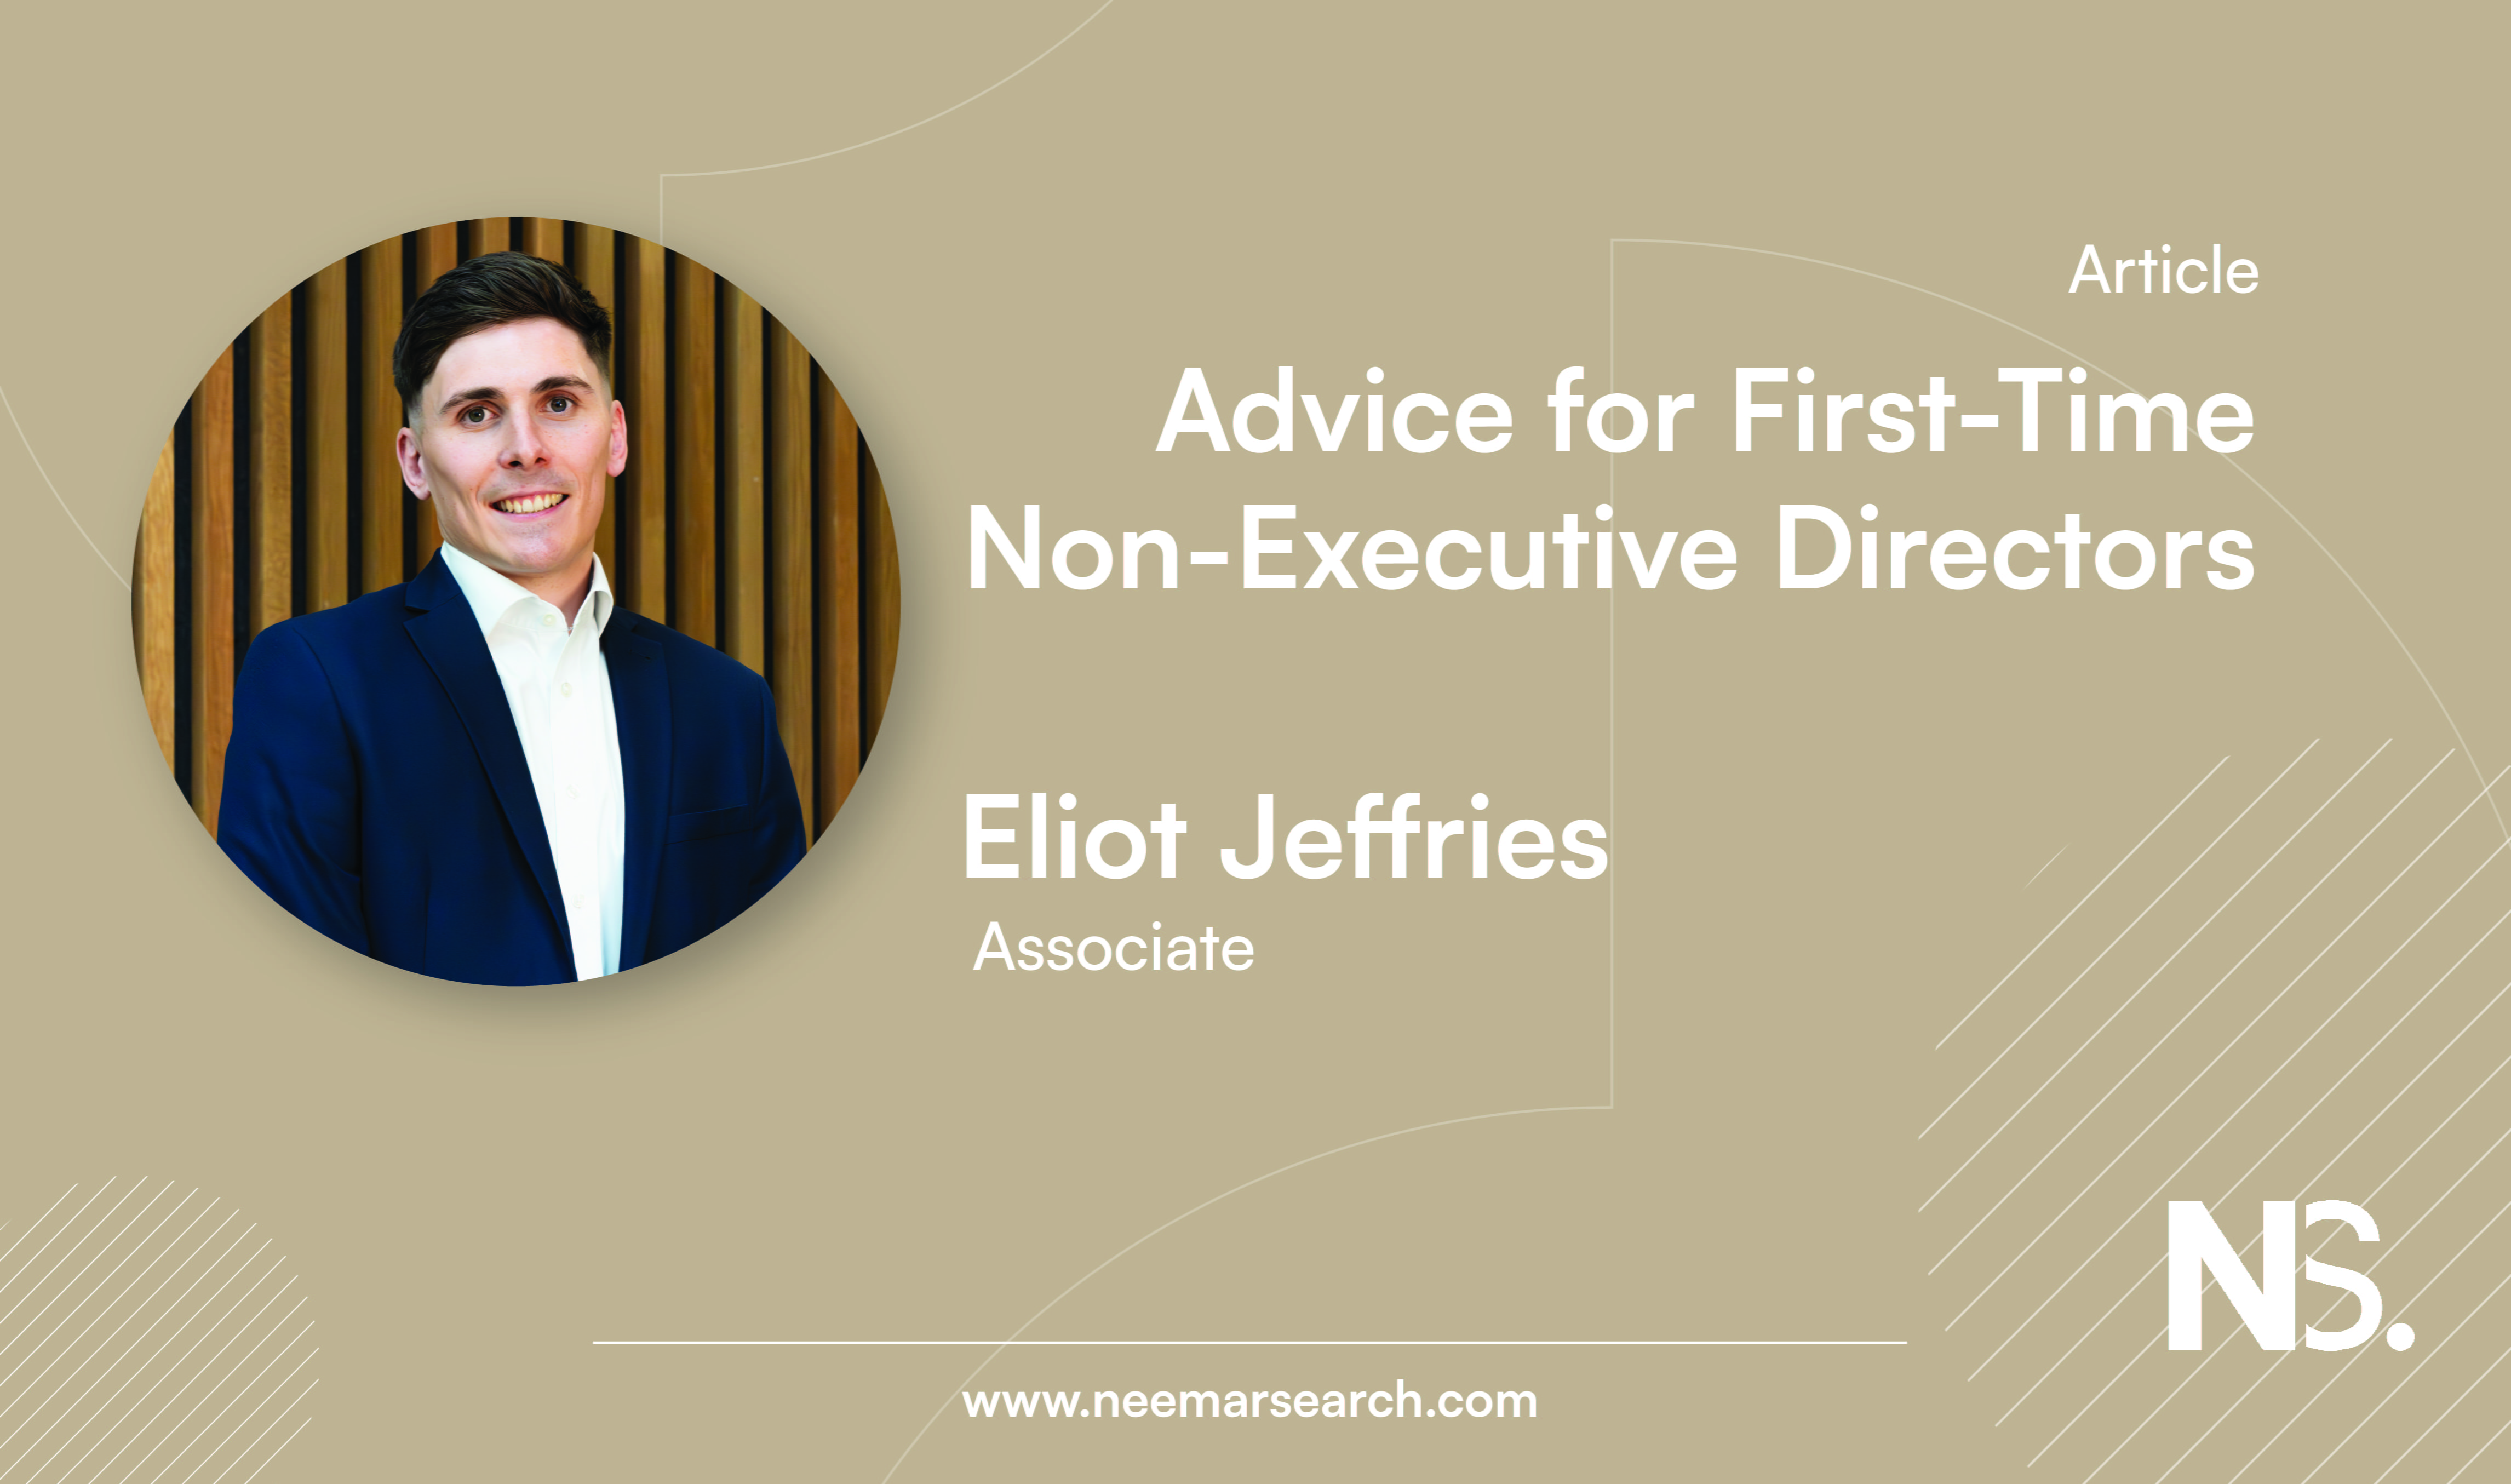 Advice for First-Time Non-Executive Directors